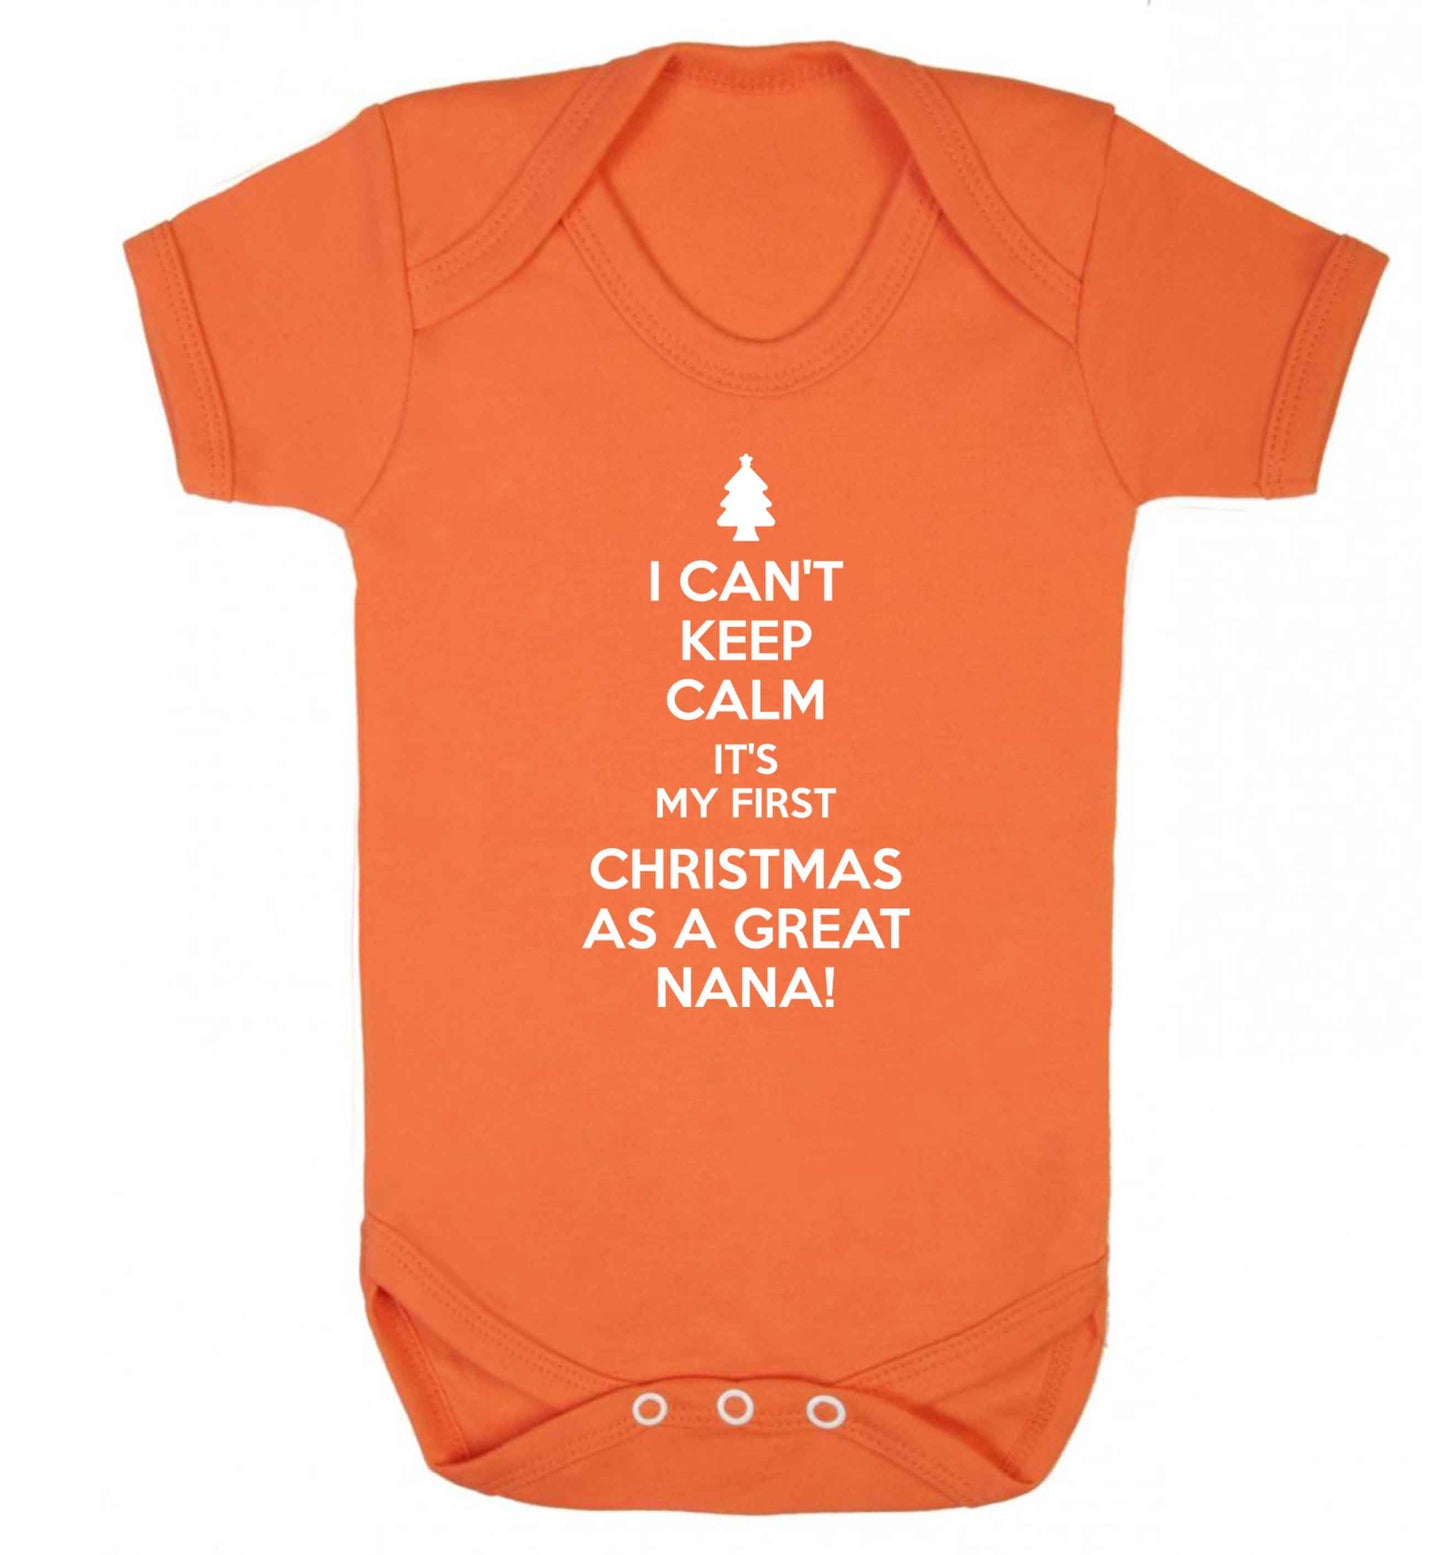 I can't keep calm it's my first Christmas as a great nana! Baby Vest orange 18-24 months